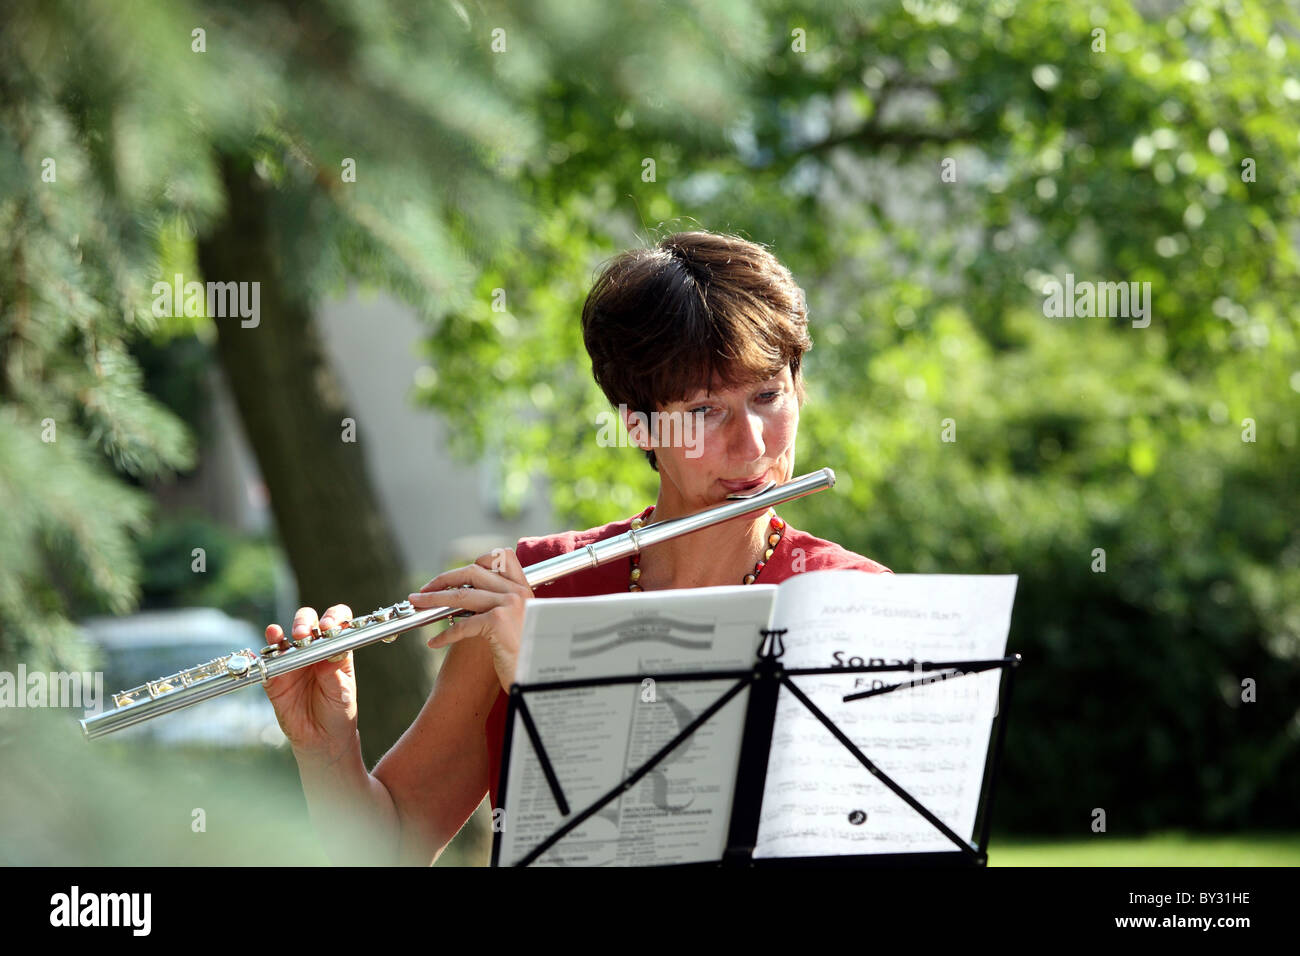 A woman playing a Western concert flute Stock Photo